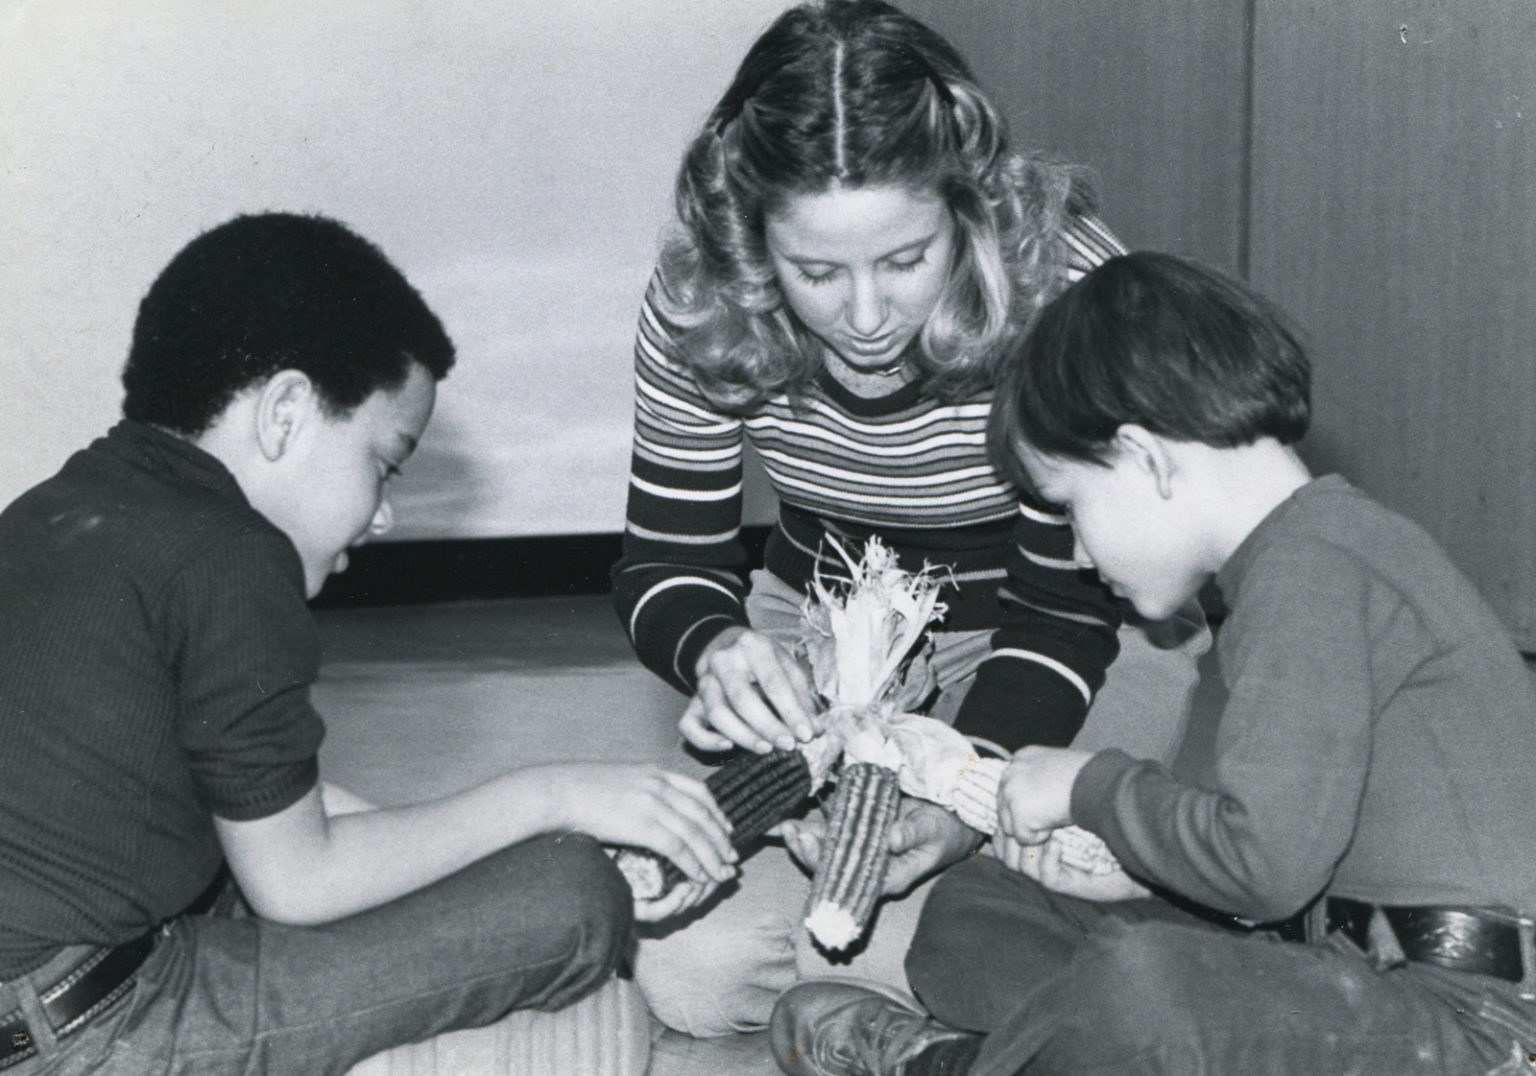 A woman works with two boys on a hands on learning activity